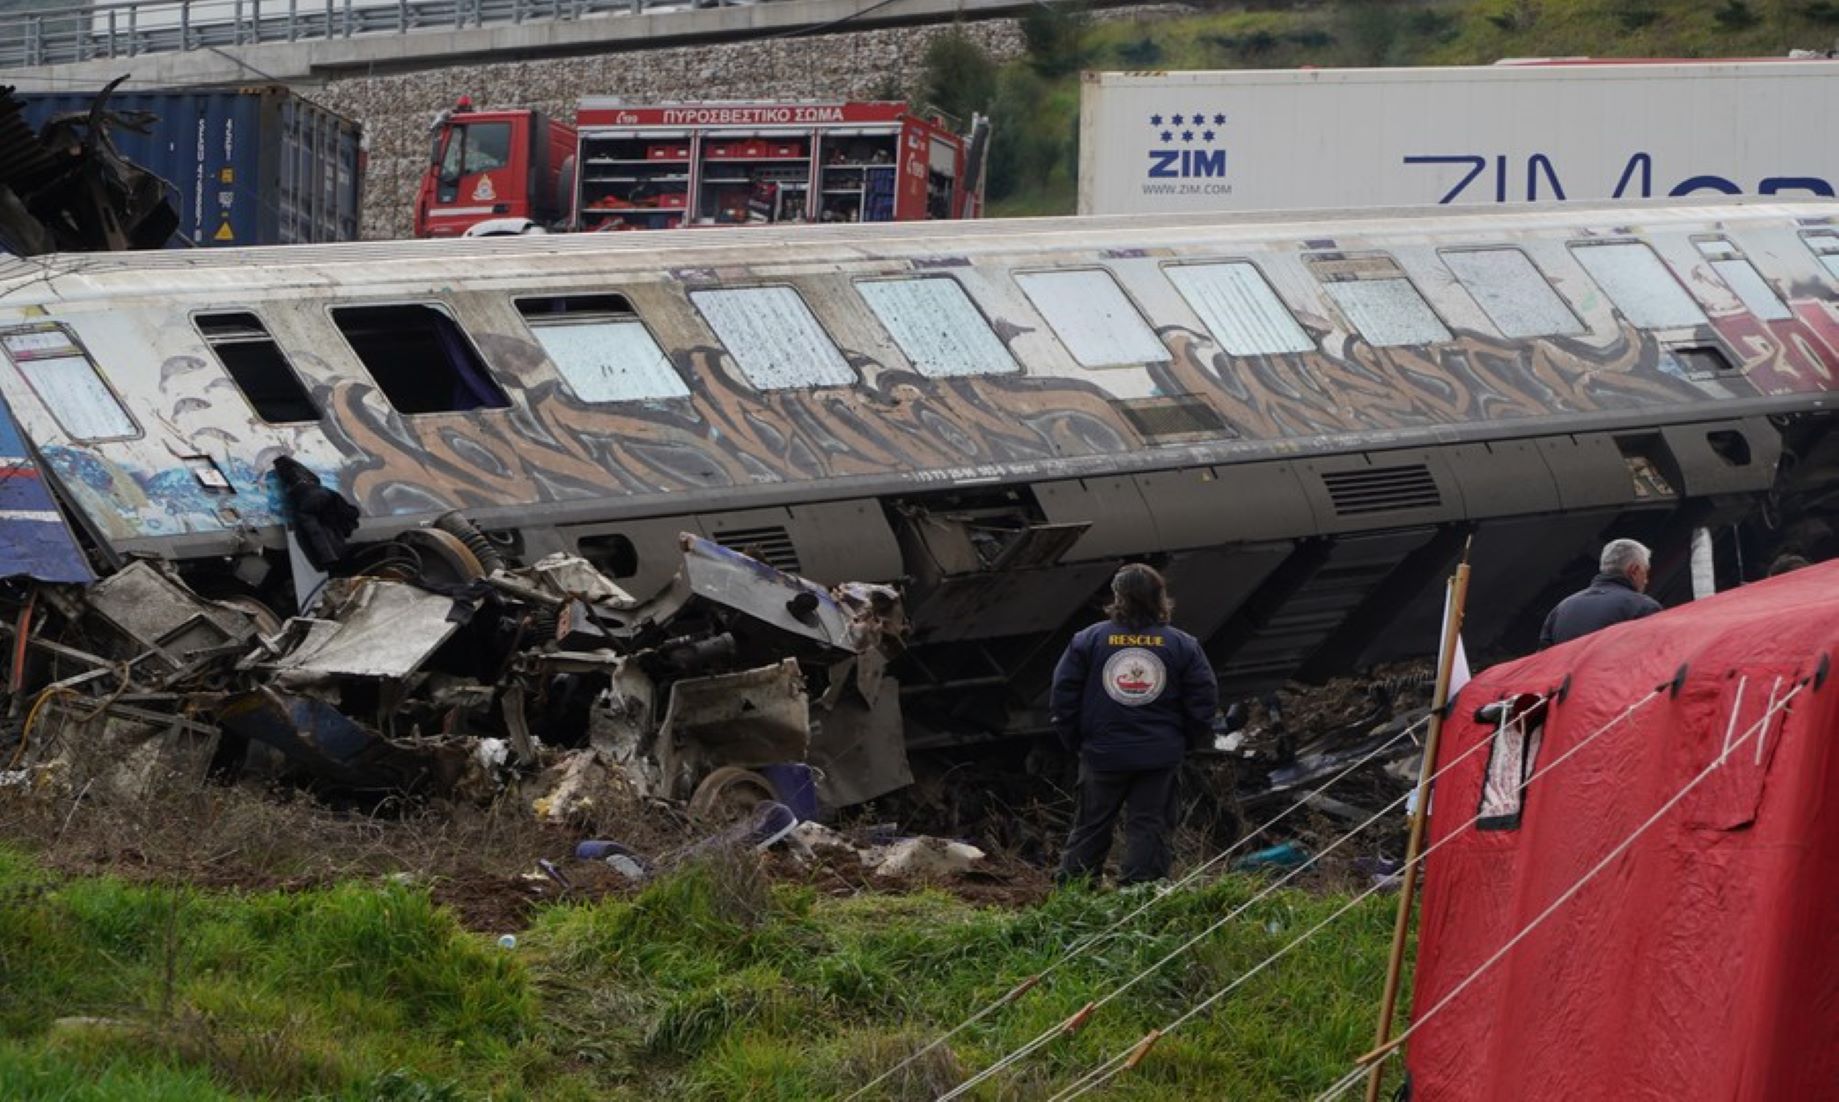 Greek PM Apologised Over Deadly Train Accident For “State’s Mistakes”